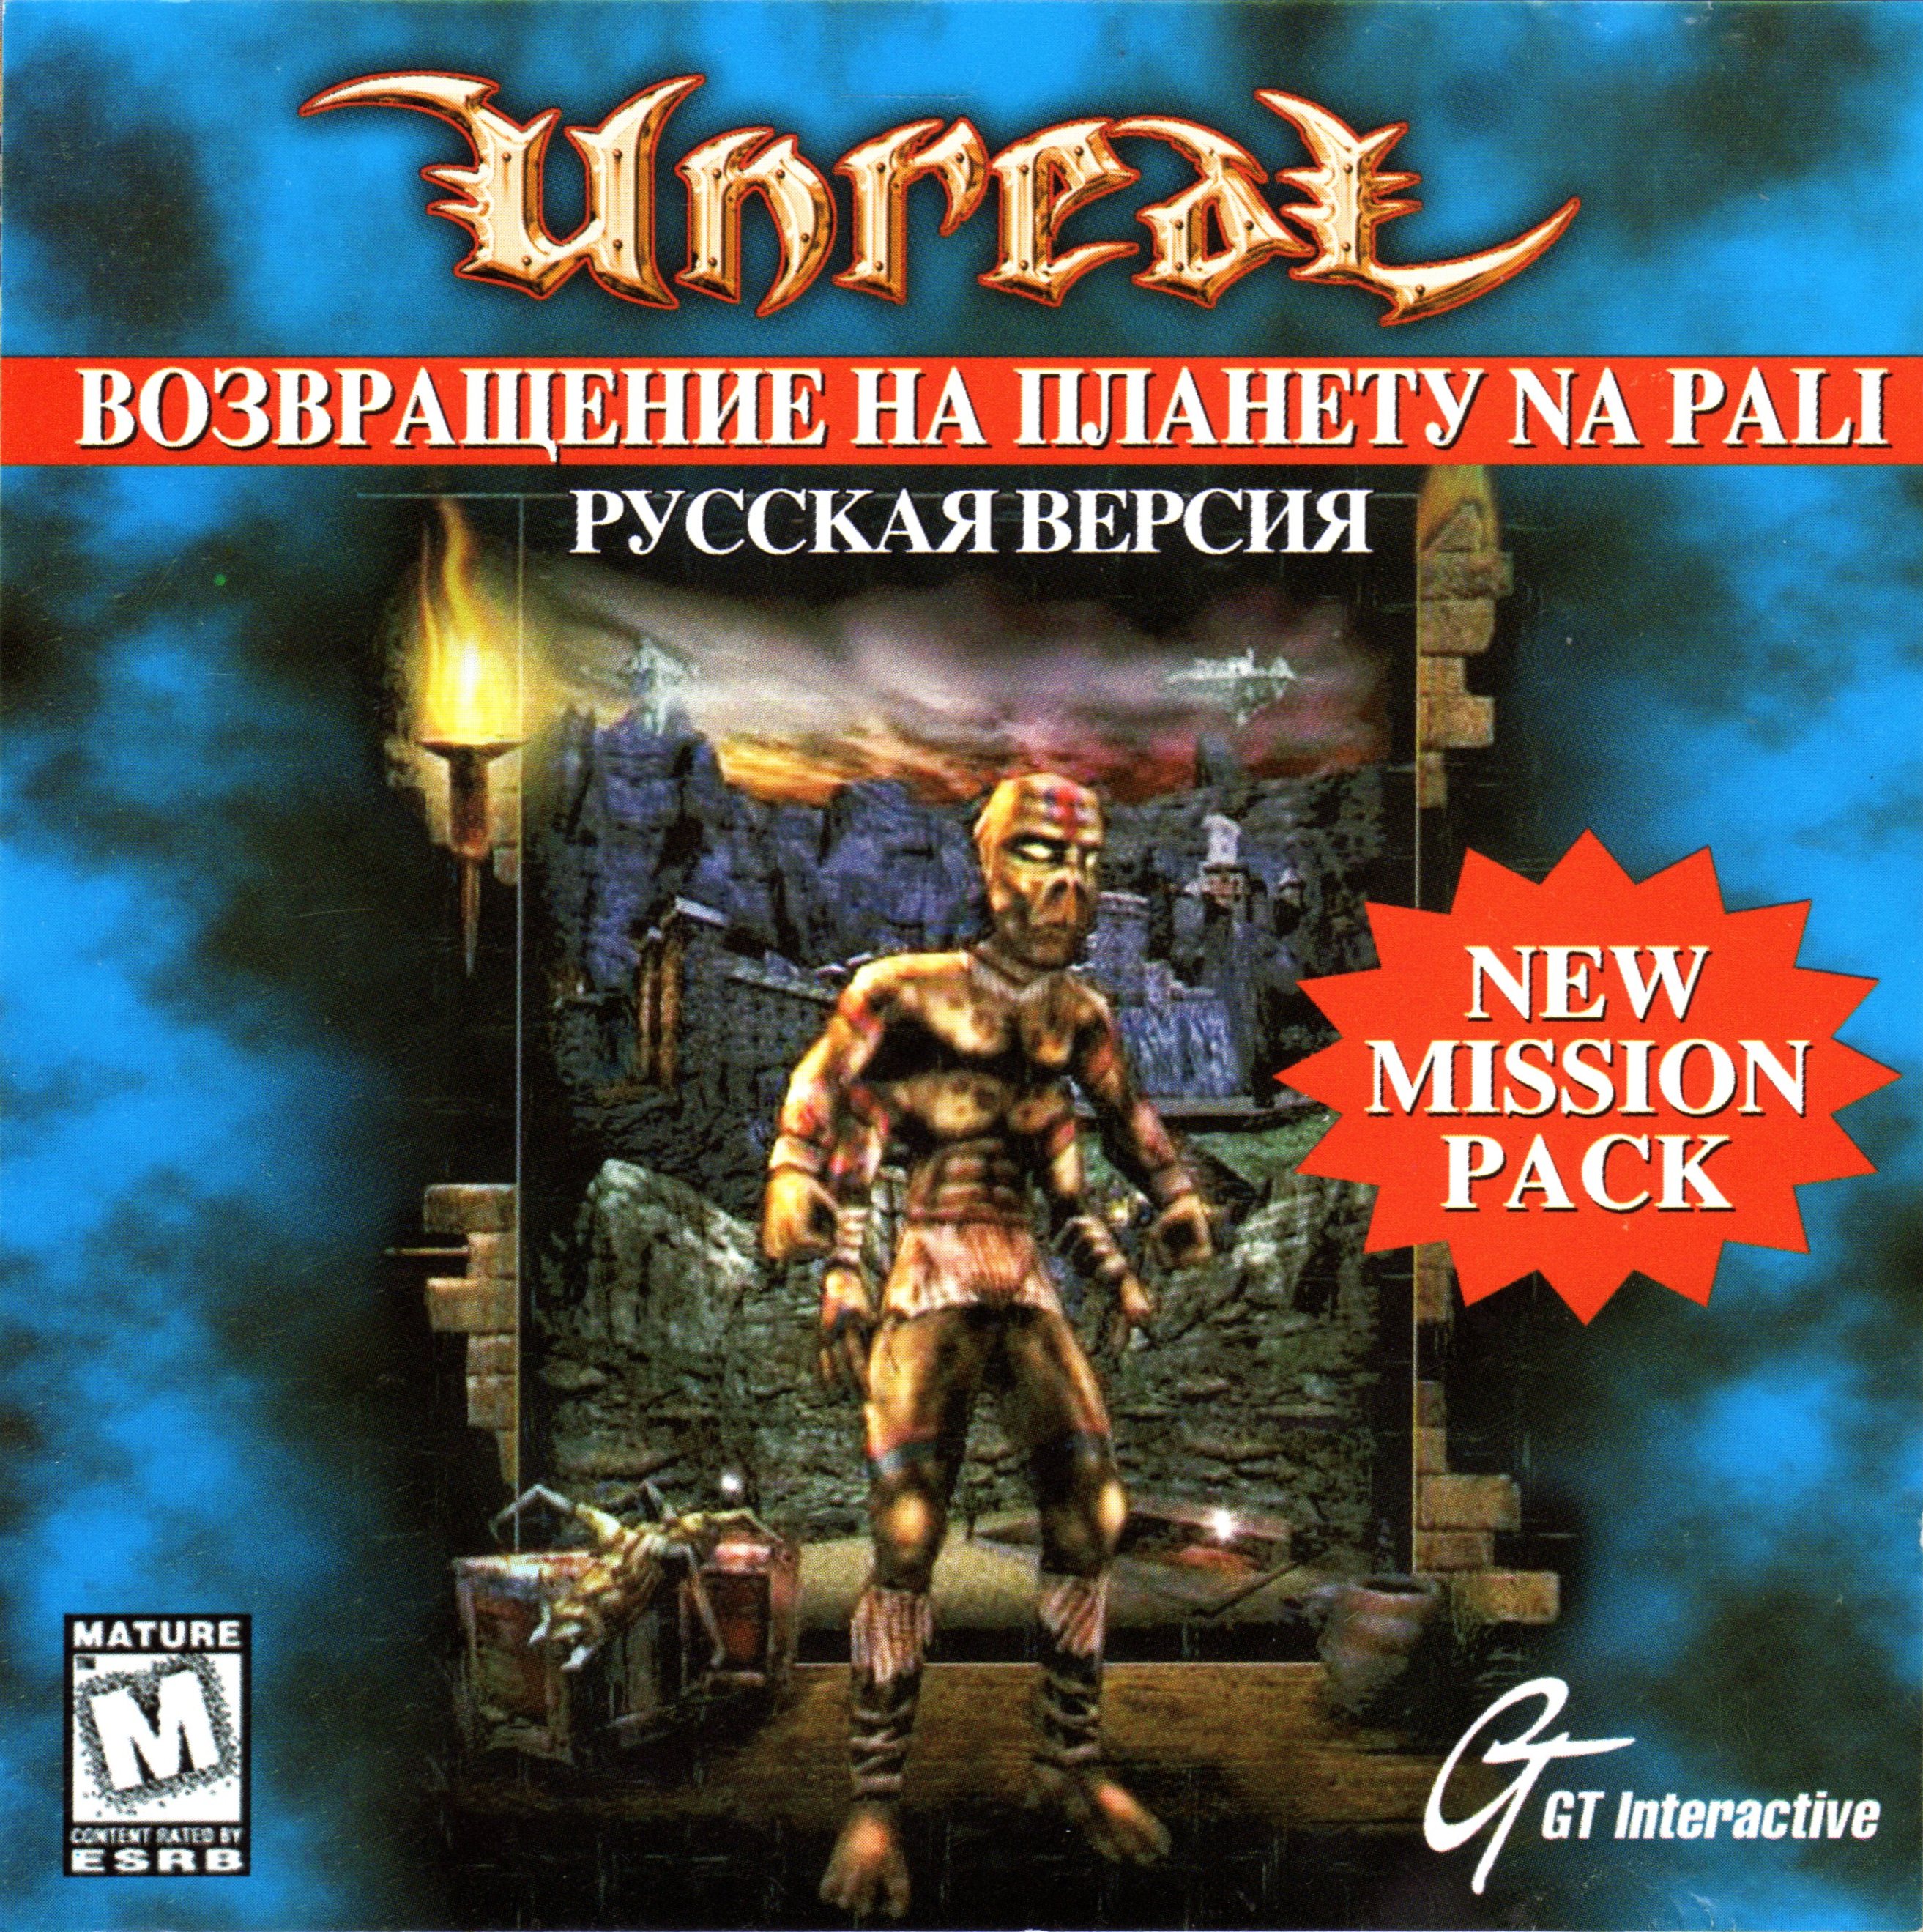 Return to planet. Unreal Mission Pack i: Return to na Pali. Unreal Return to na Pali. Return to na-Pali Cover. Unreal Gold Art.